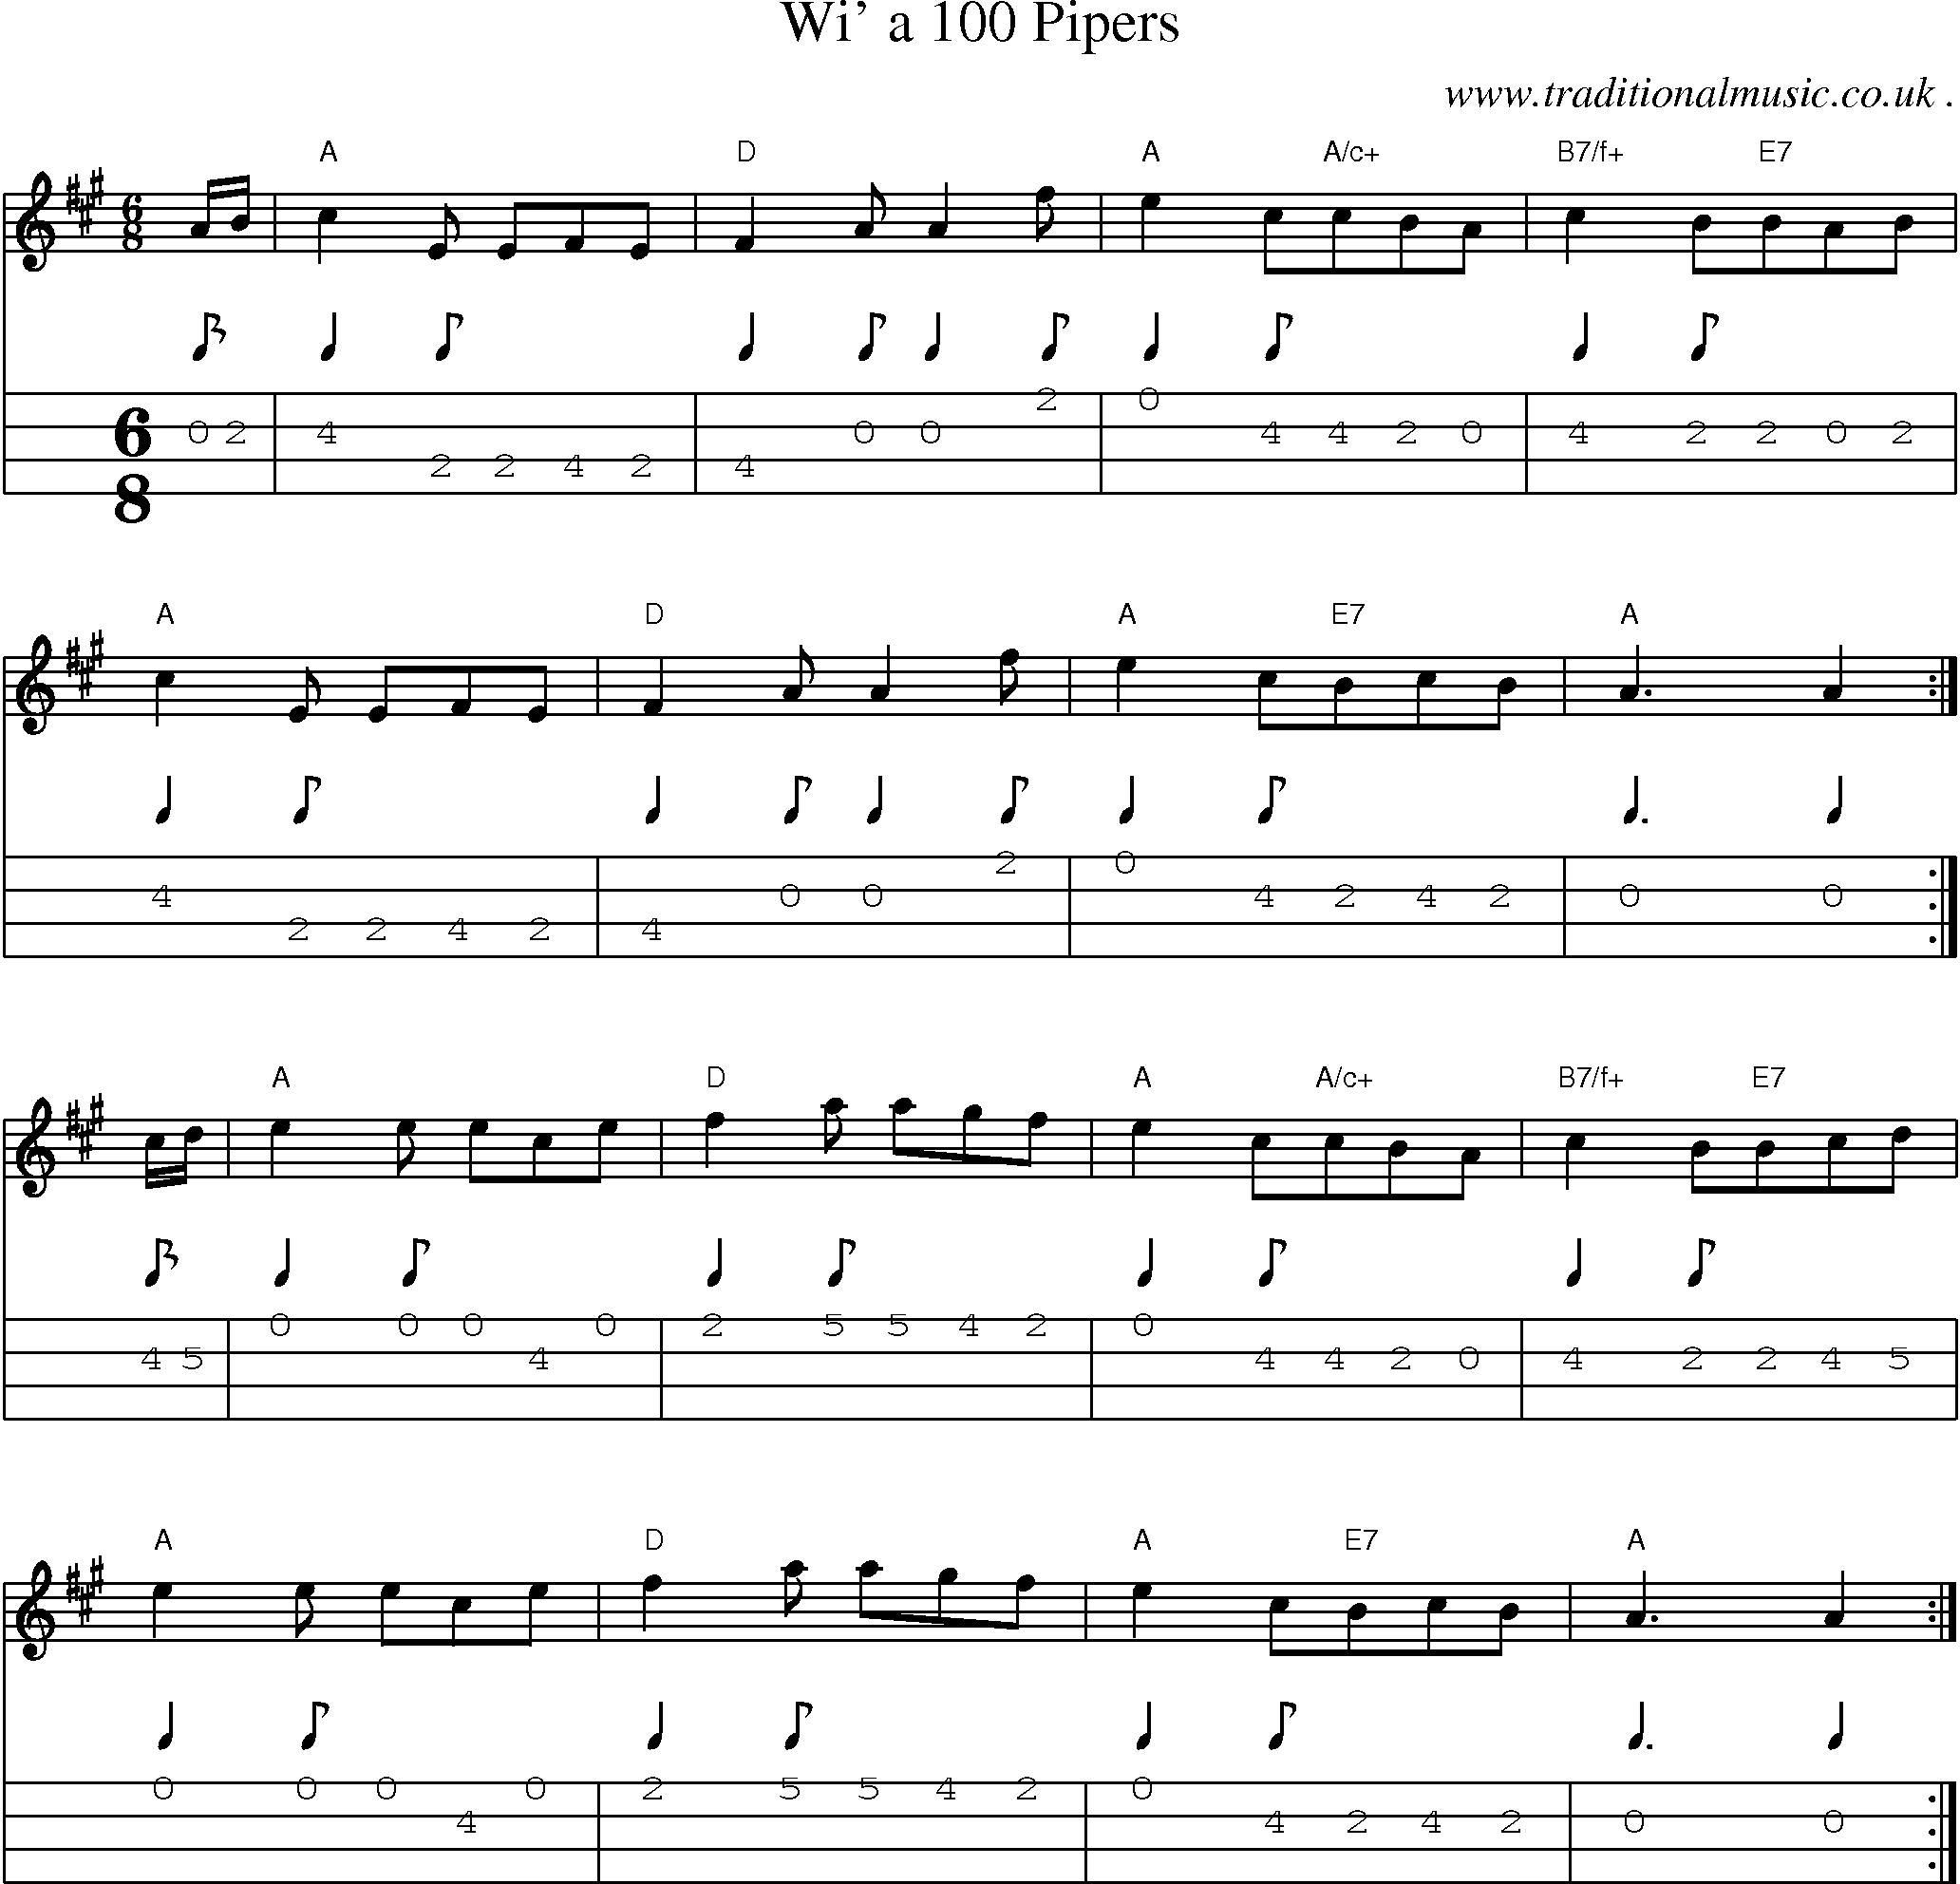 Sheet-Music and Mandolin Tabs for Wi A 100 Pipers